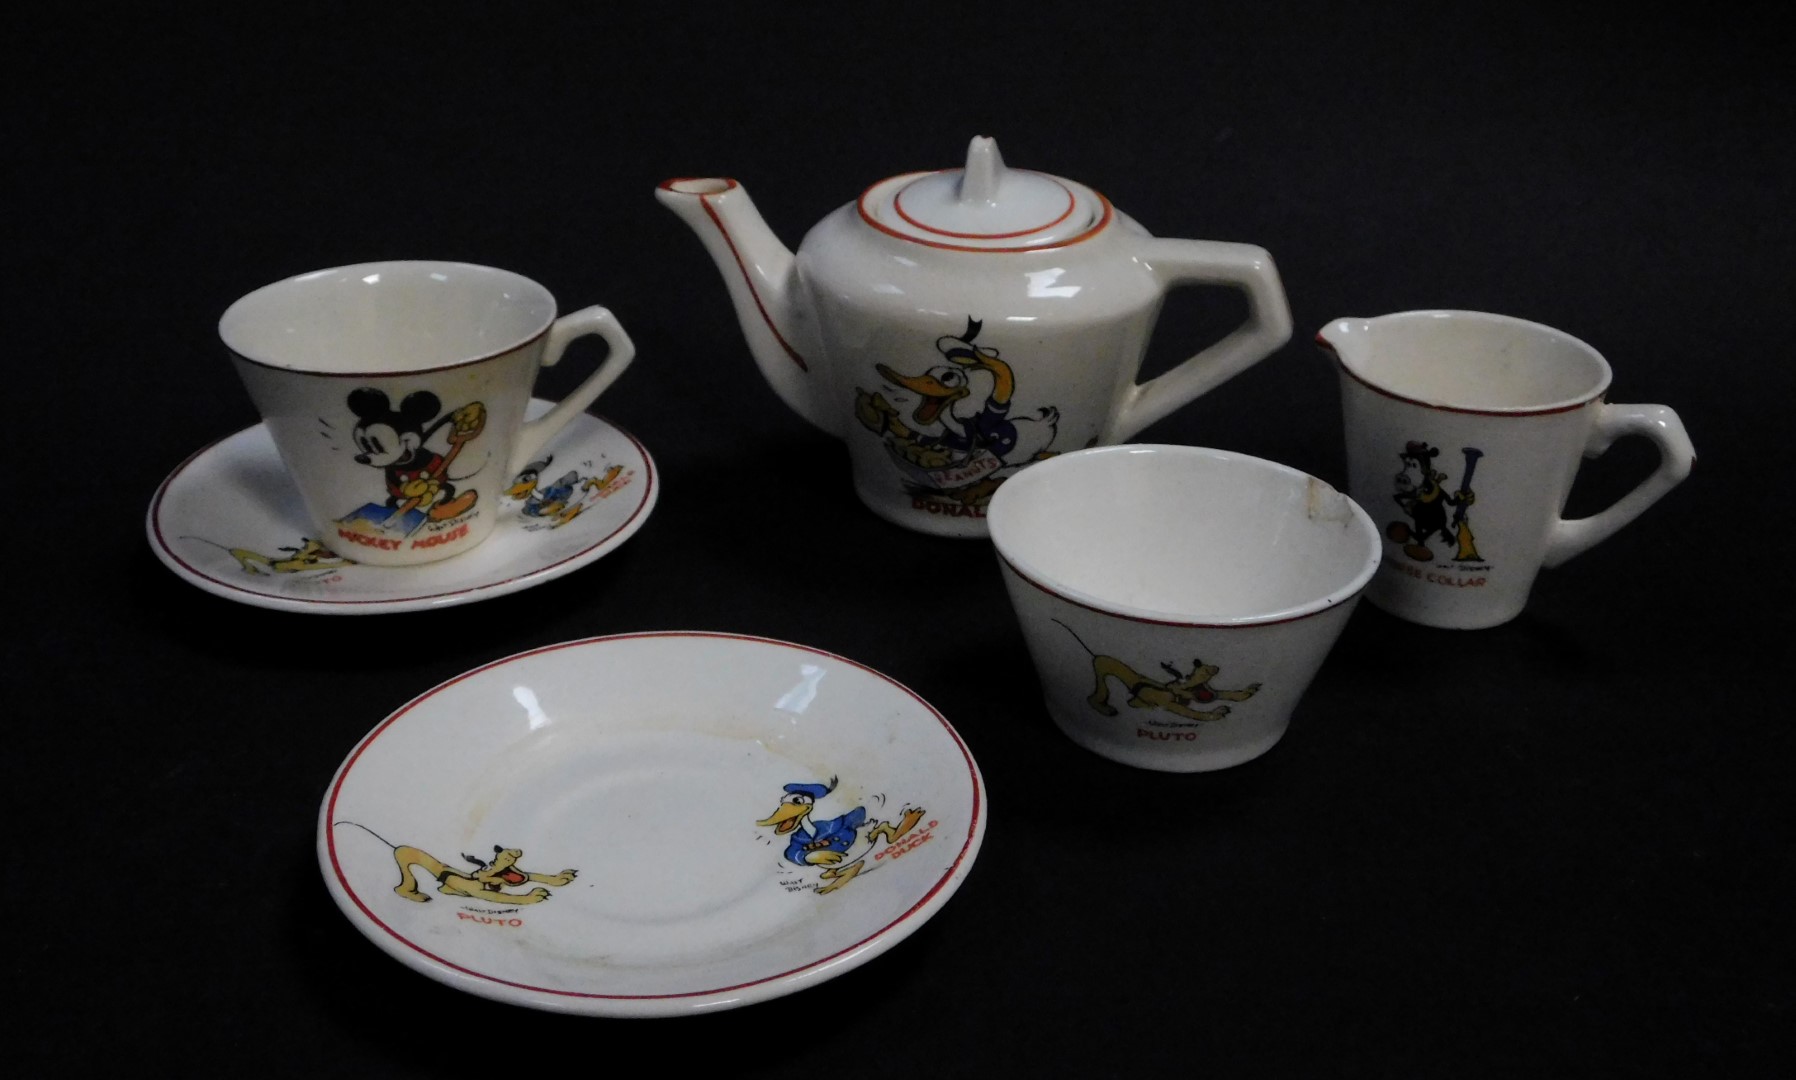 An early 20thC Wade Heath for Walt Disney pottery child's part tea set, decorated with Donald